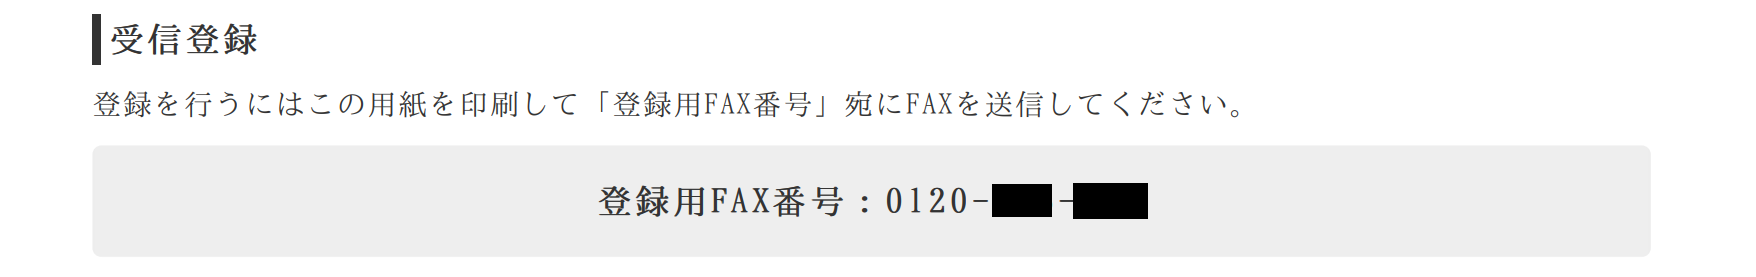 FAX登録、3.PNG